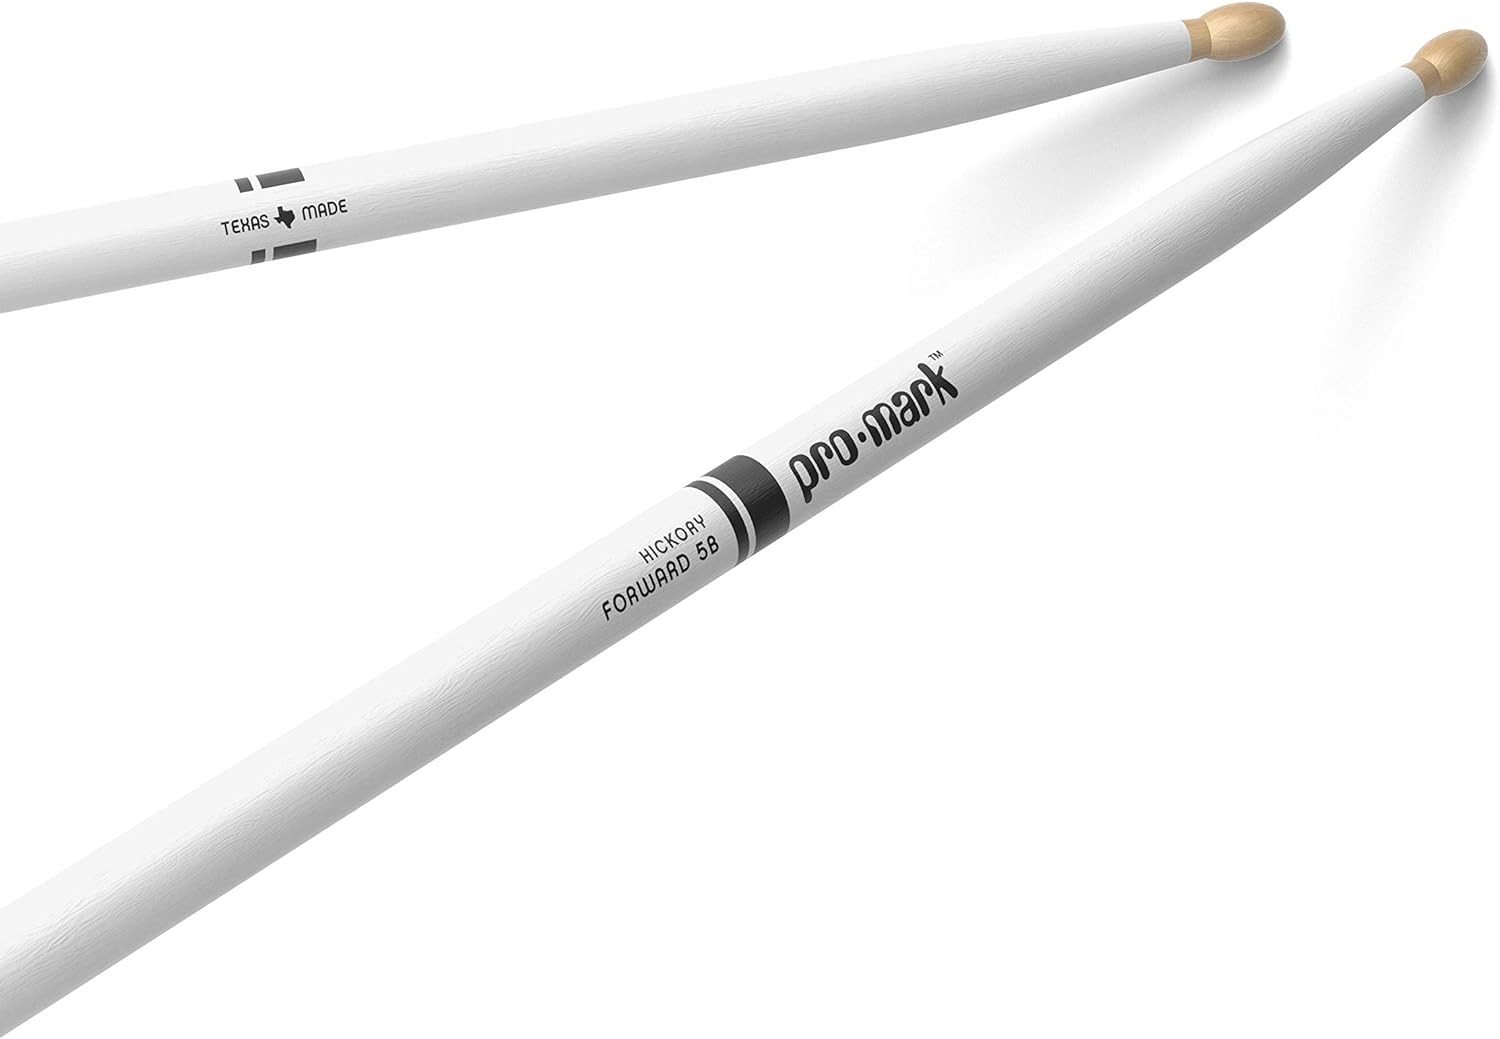 ProMark Classic Forward 5A White Hickory Drumsticks, Oval Wood Tip